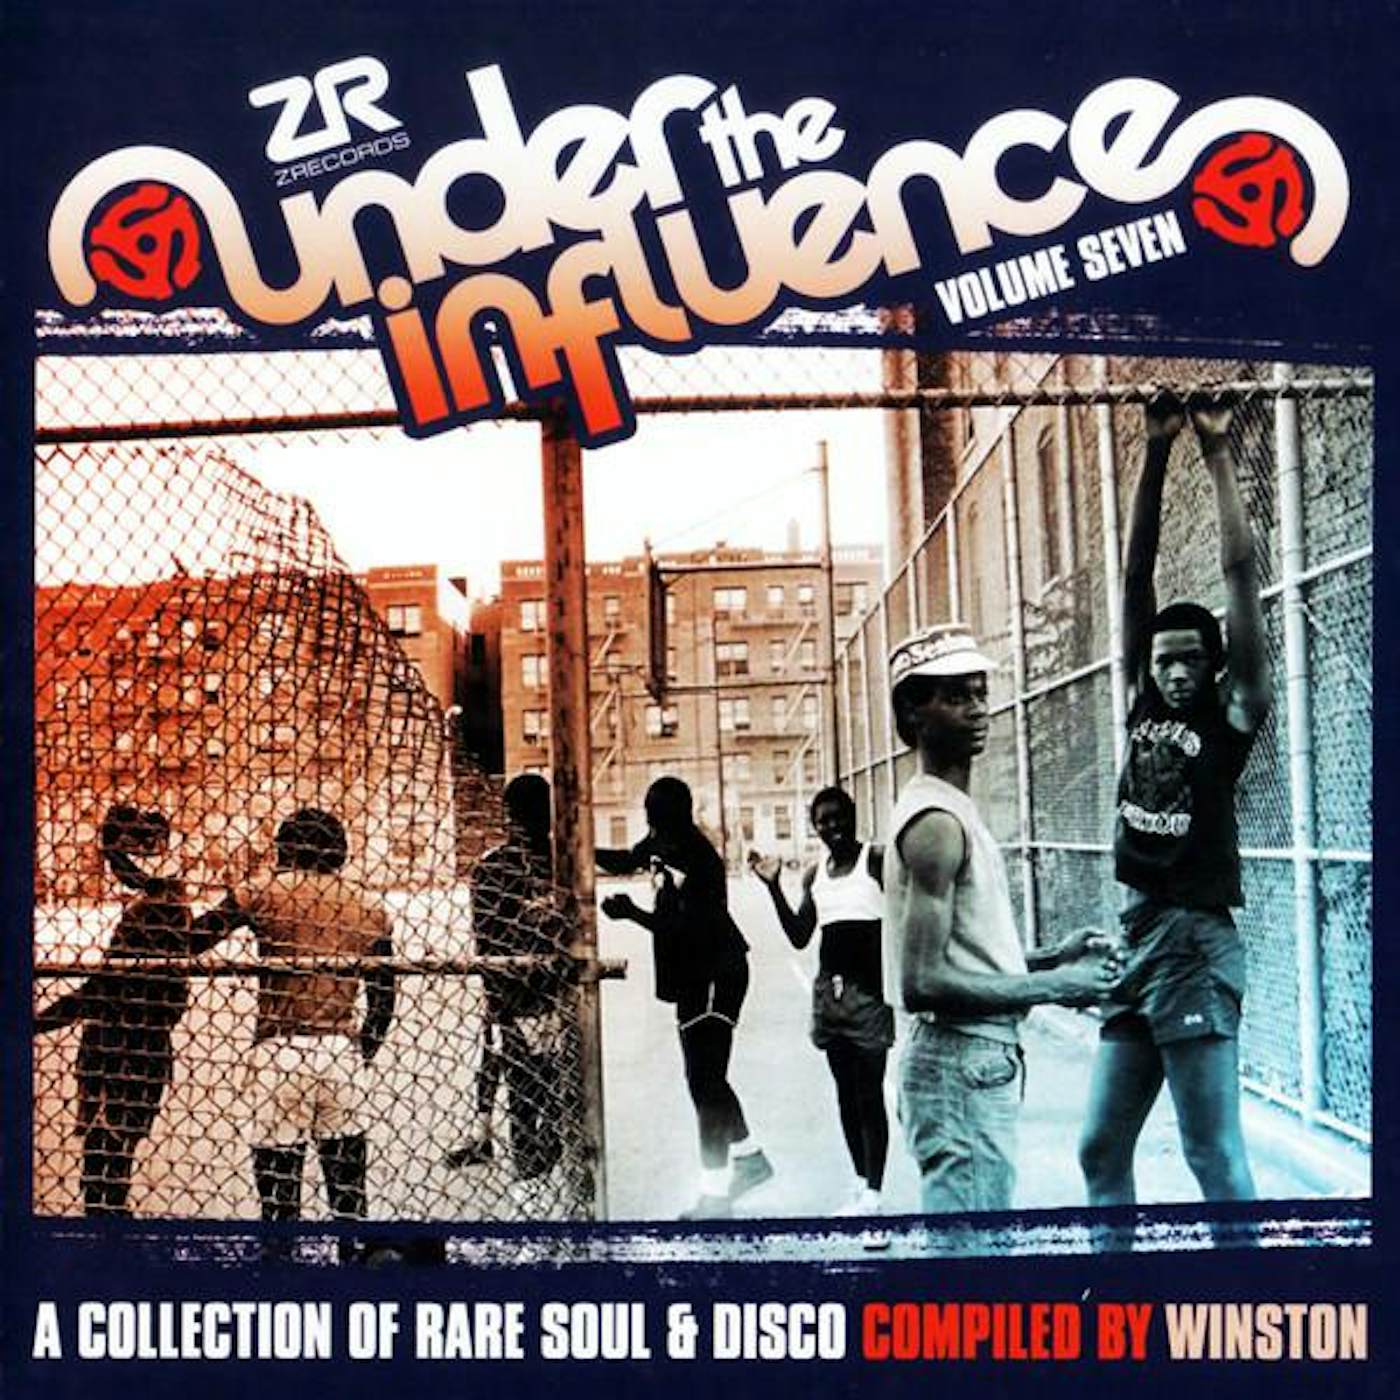 Winston Under The Influence Vol. 7: A Collection Of Rare Soul And Disco CD